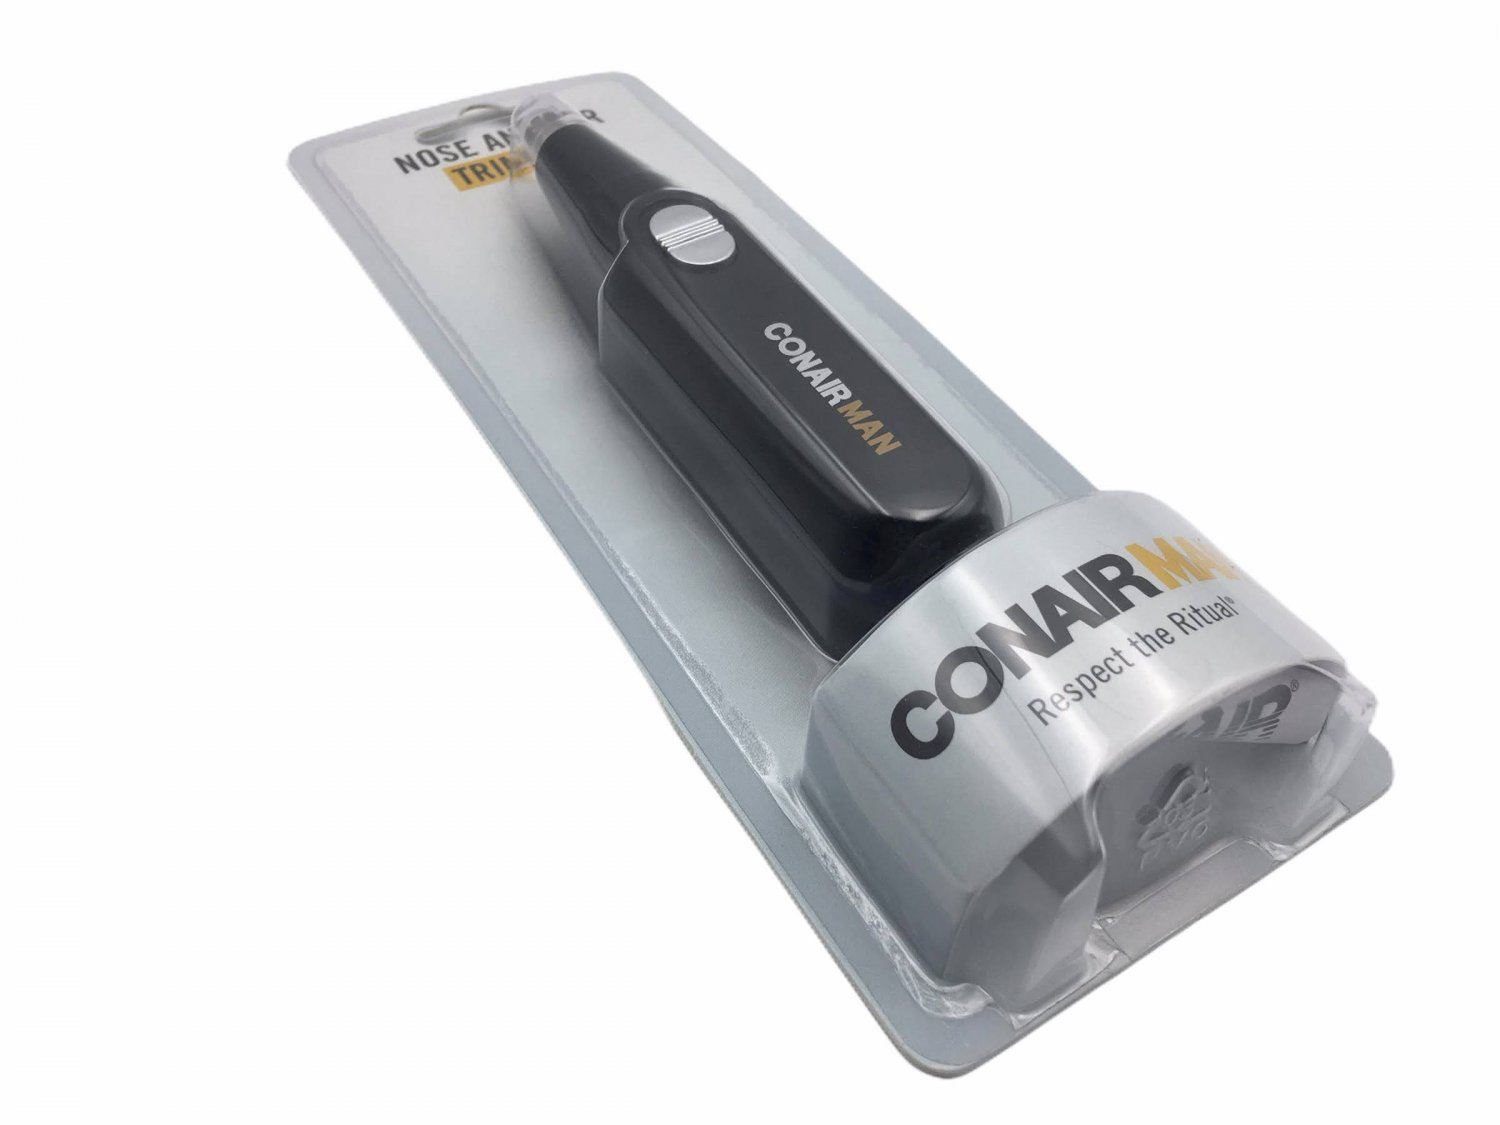 ConairMAN Nose And Ear Hair Trimmer, Battery Operated Compact Travel Size